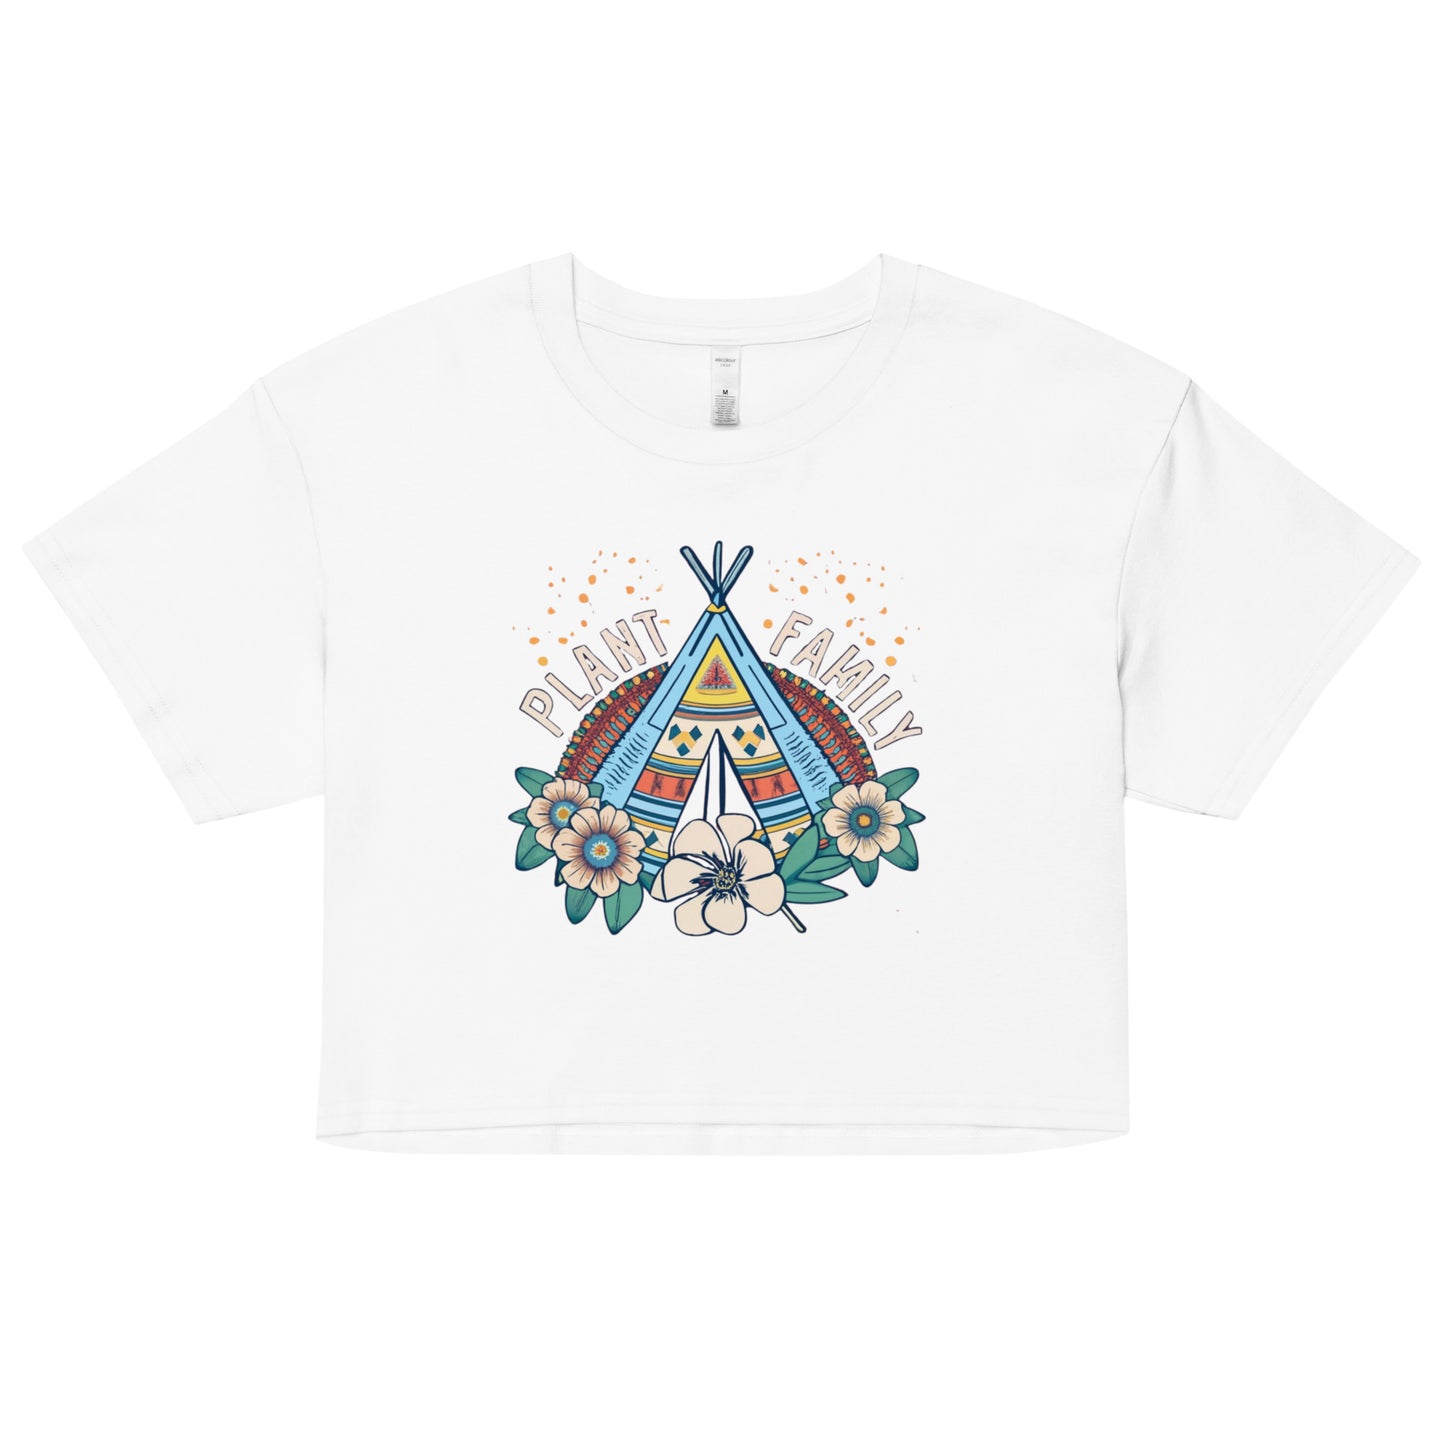 Plant family- Tipi- Crop top